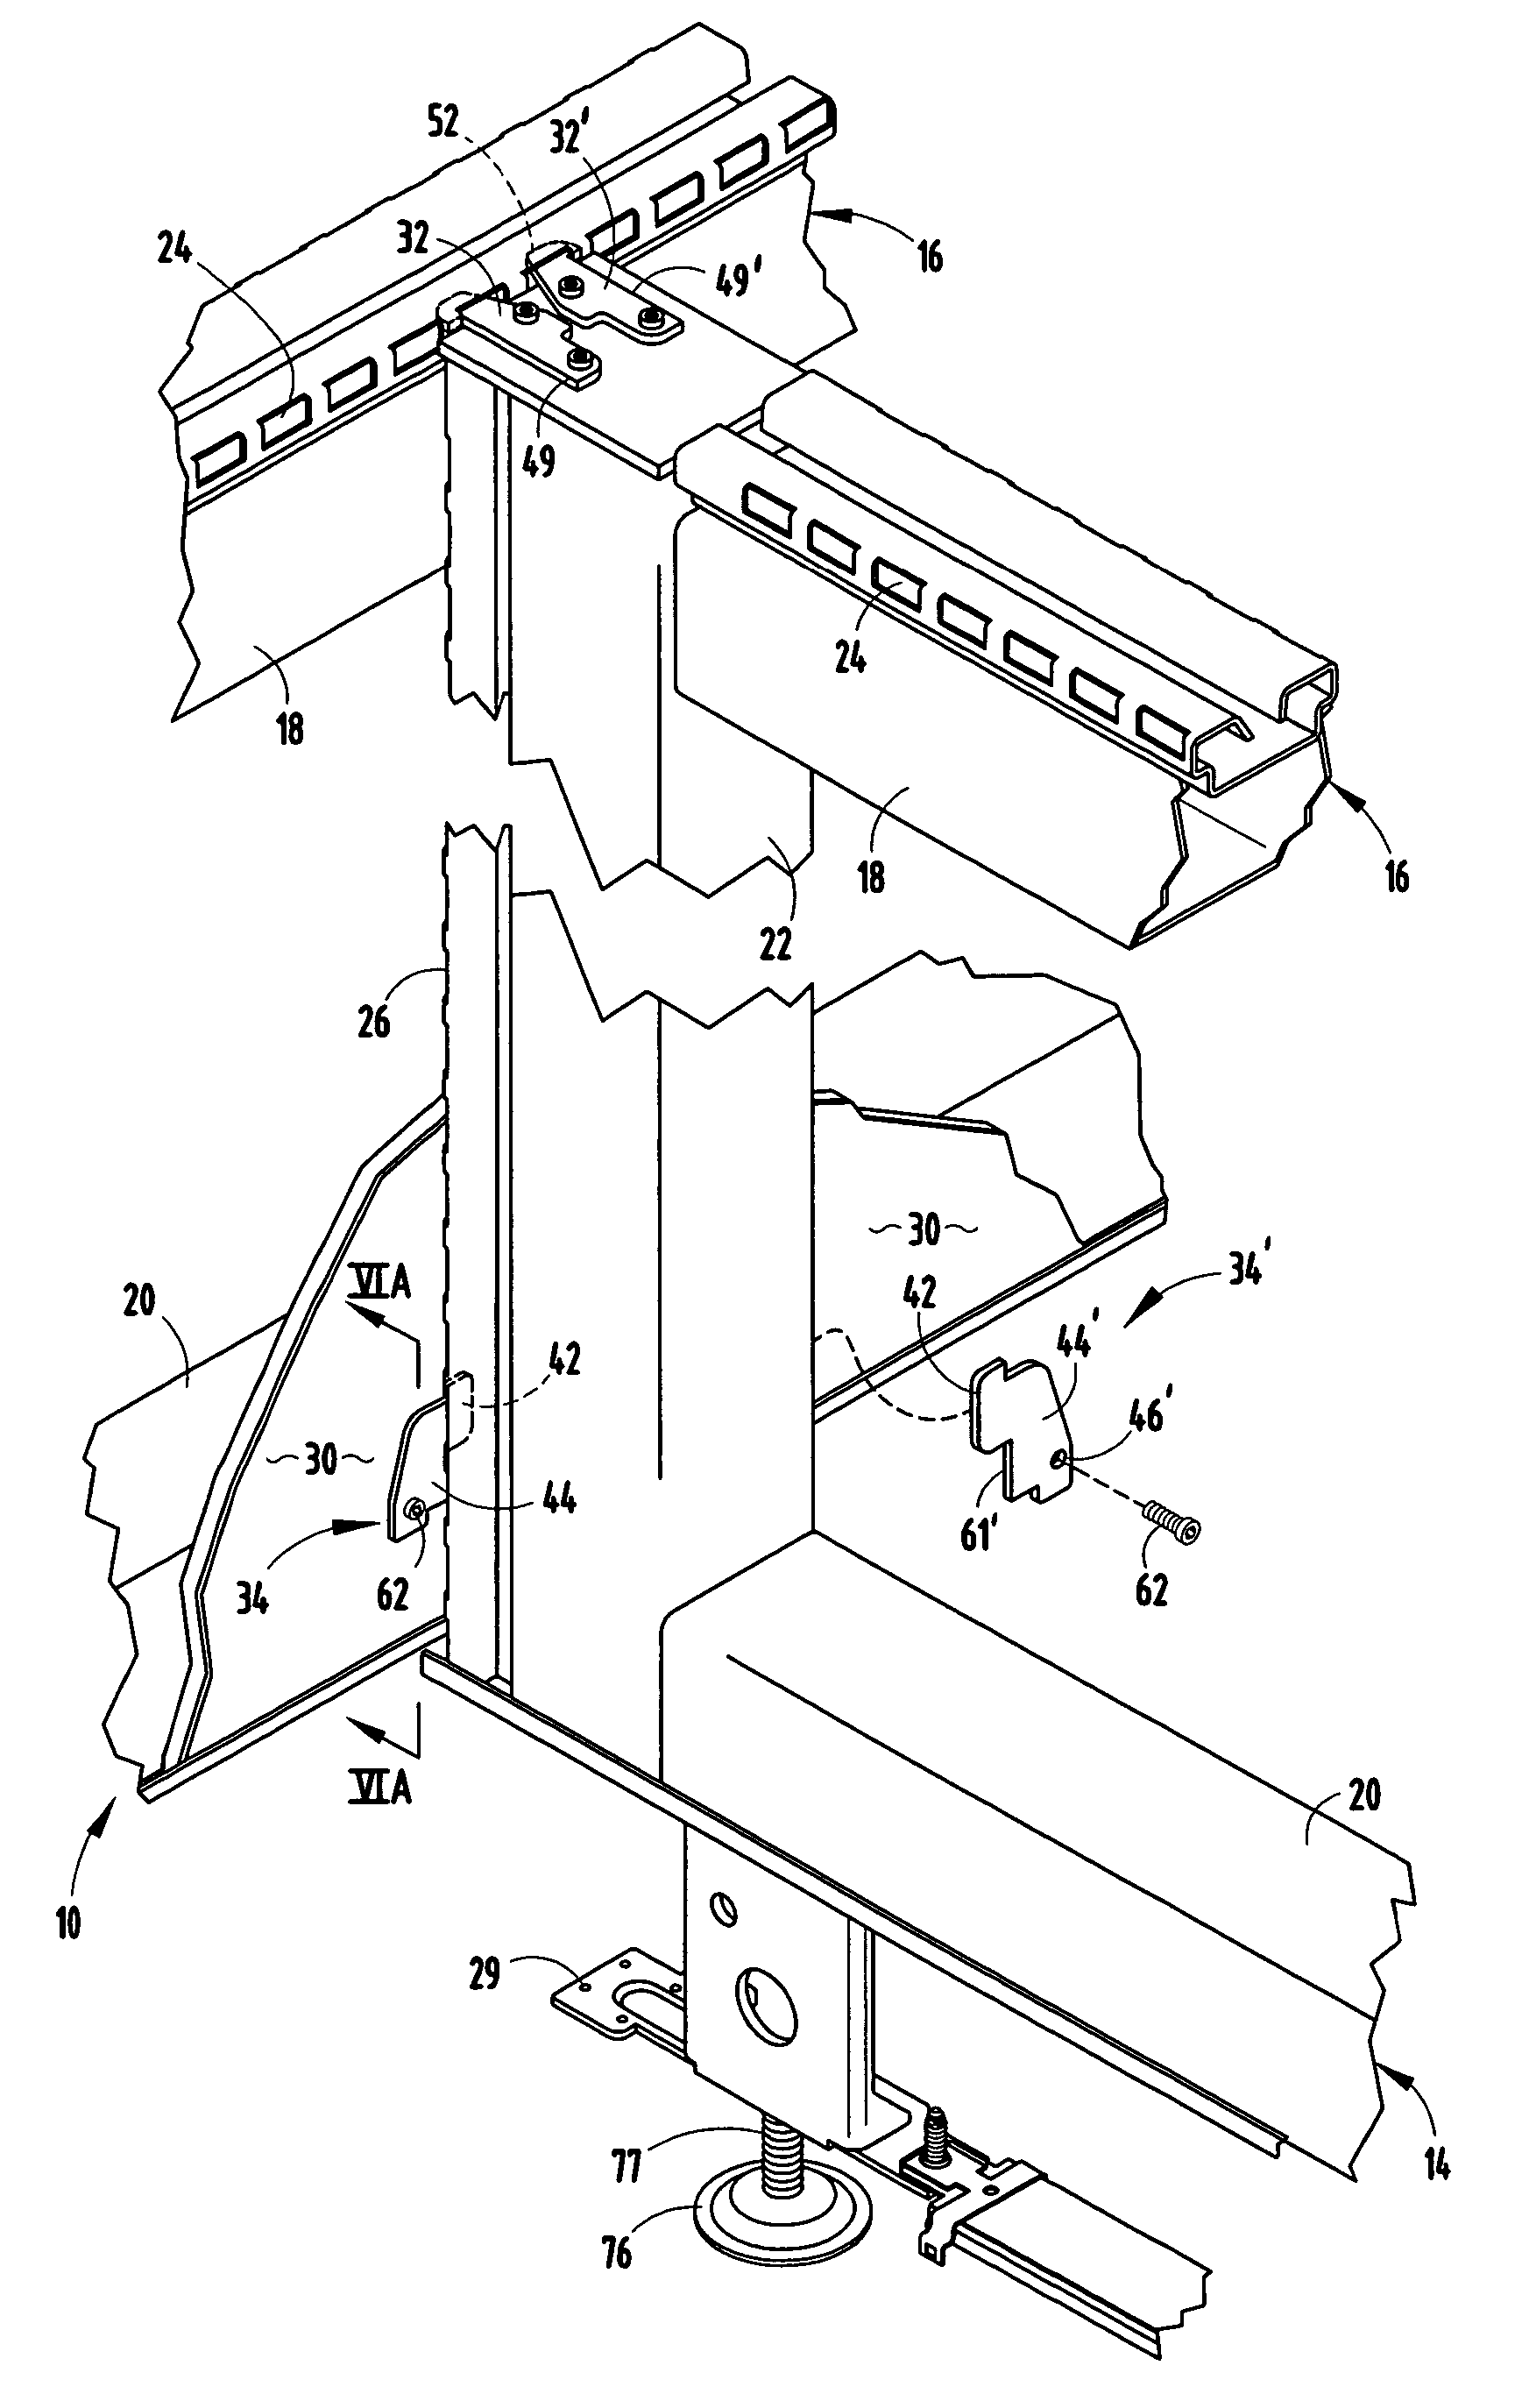 Partition panel system and method